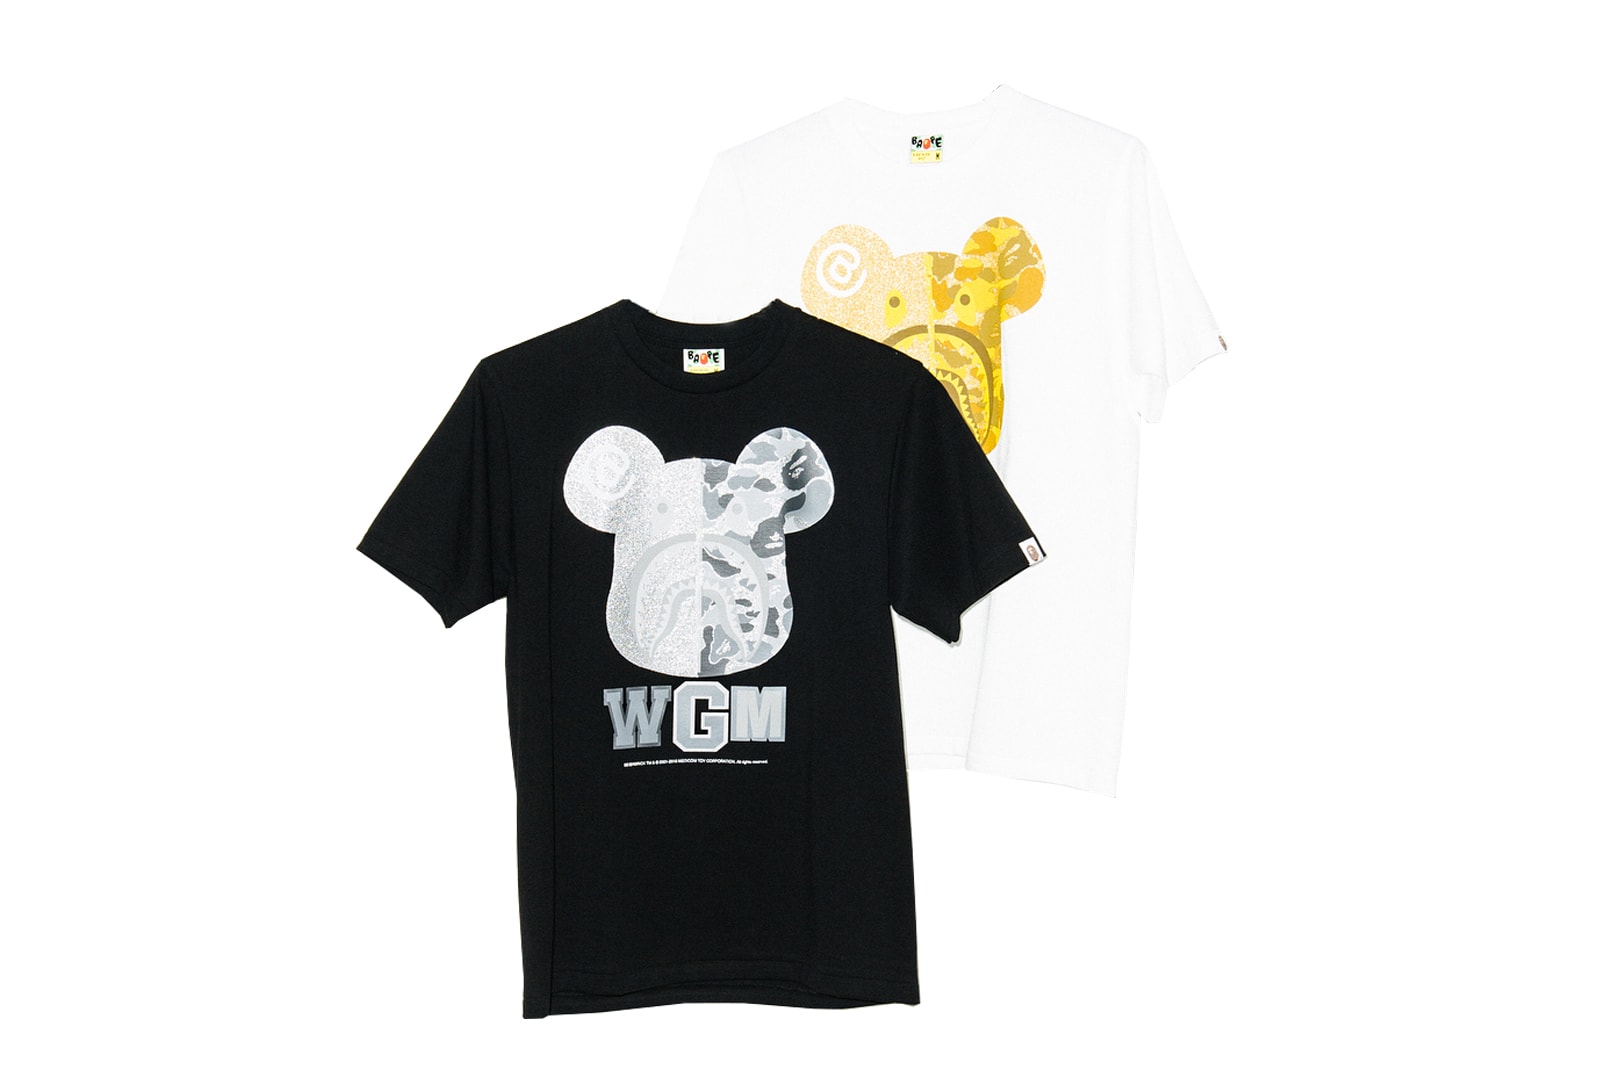 BAPE x Bearbrick Medicom Toy BE@RBRICK Collection Undefeated Hoodies Tees T-Shirts Available La Brea